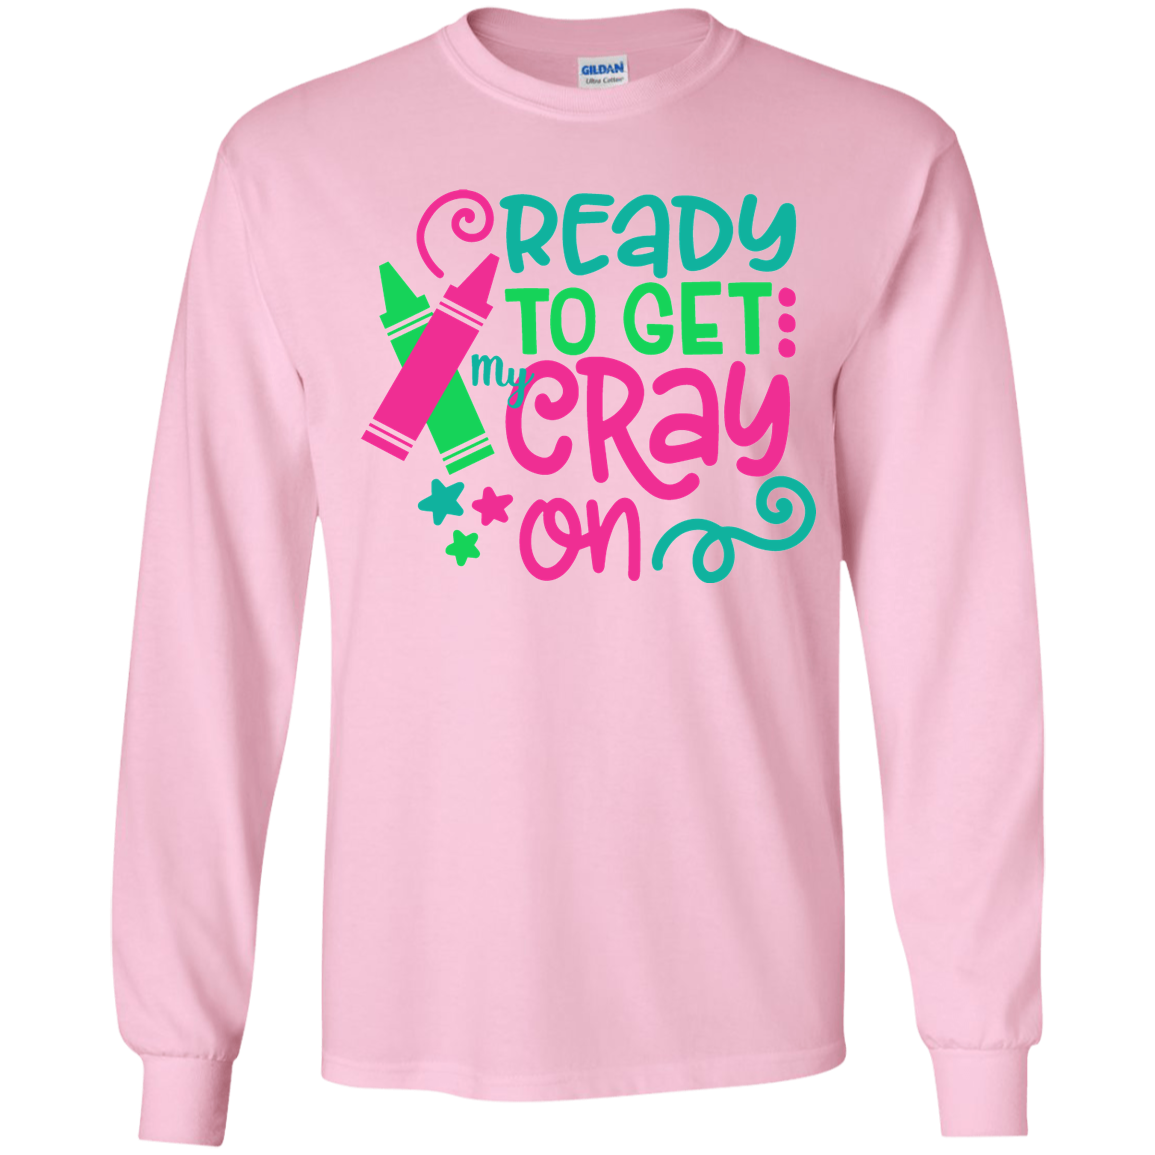 Ready to Get My Cray On Youth Kids Long Sleeve Tee Shirt Pink